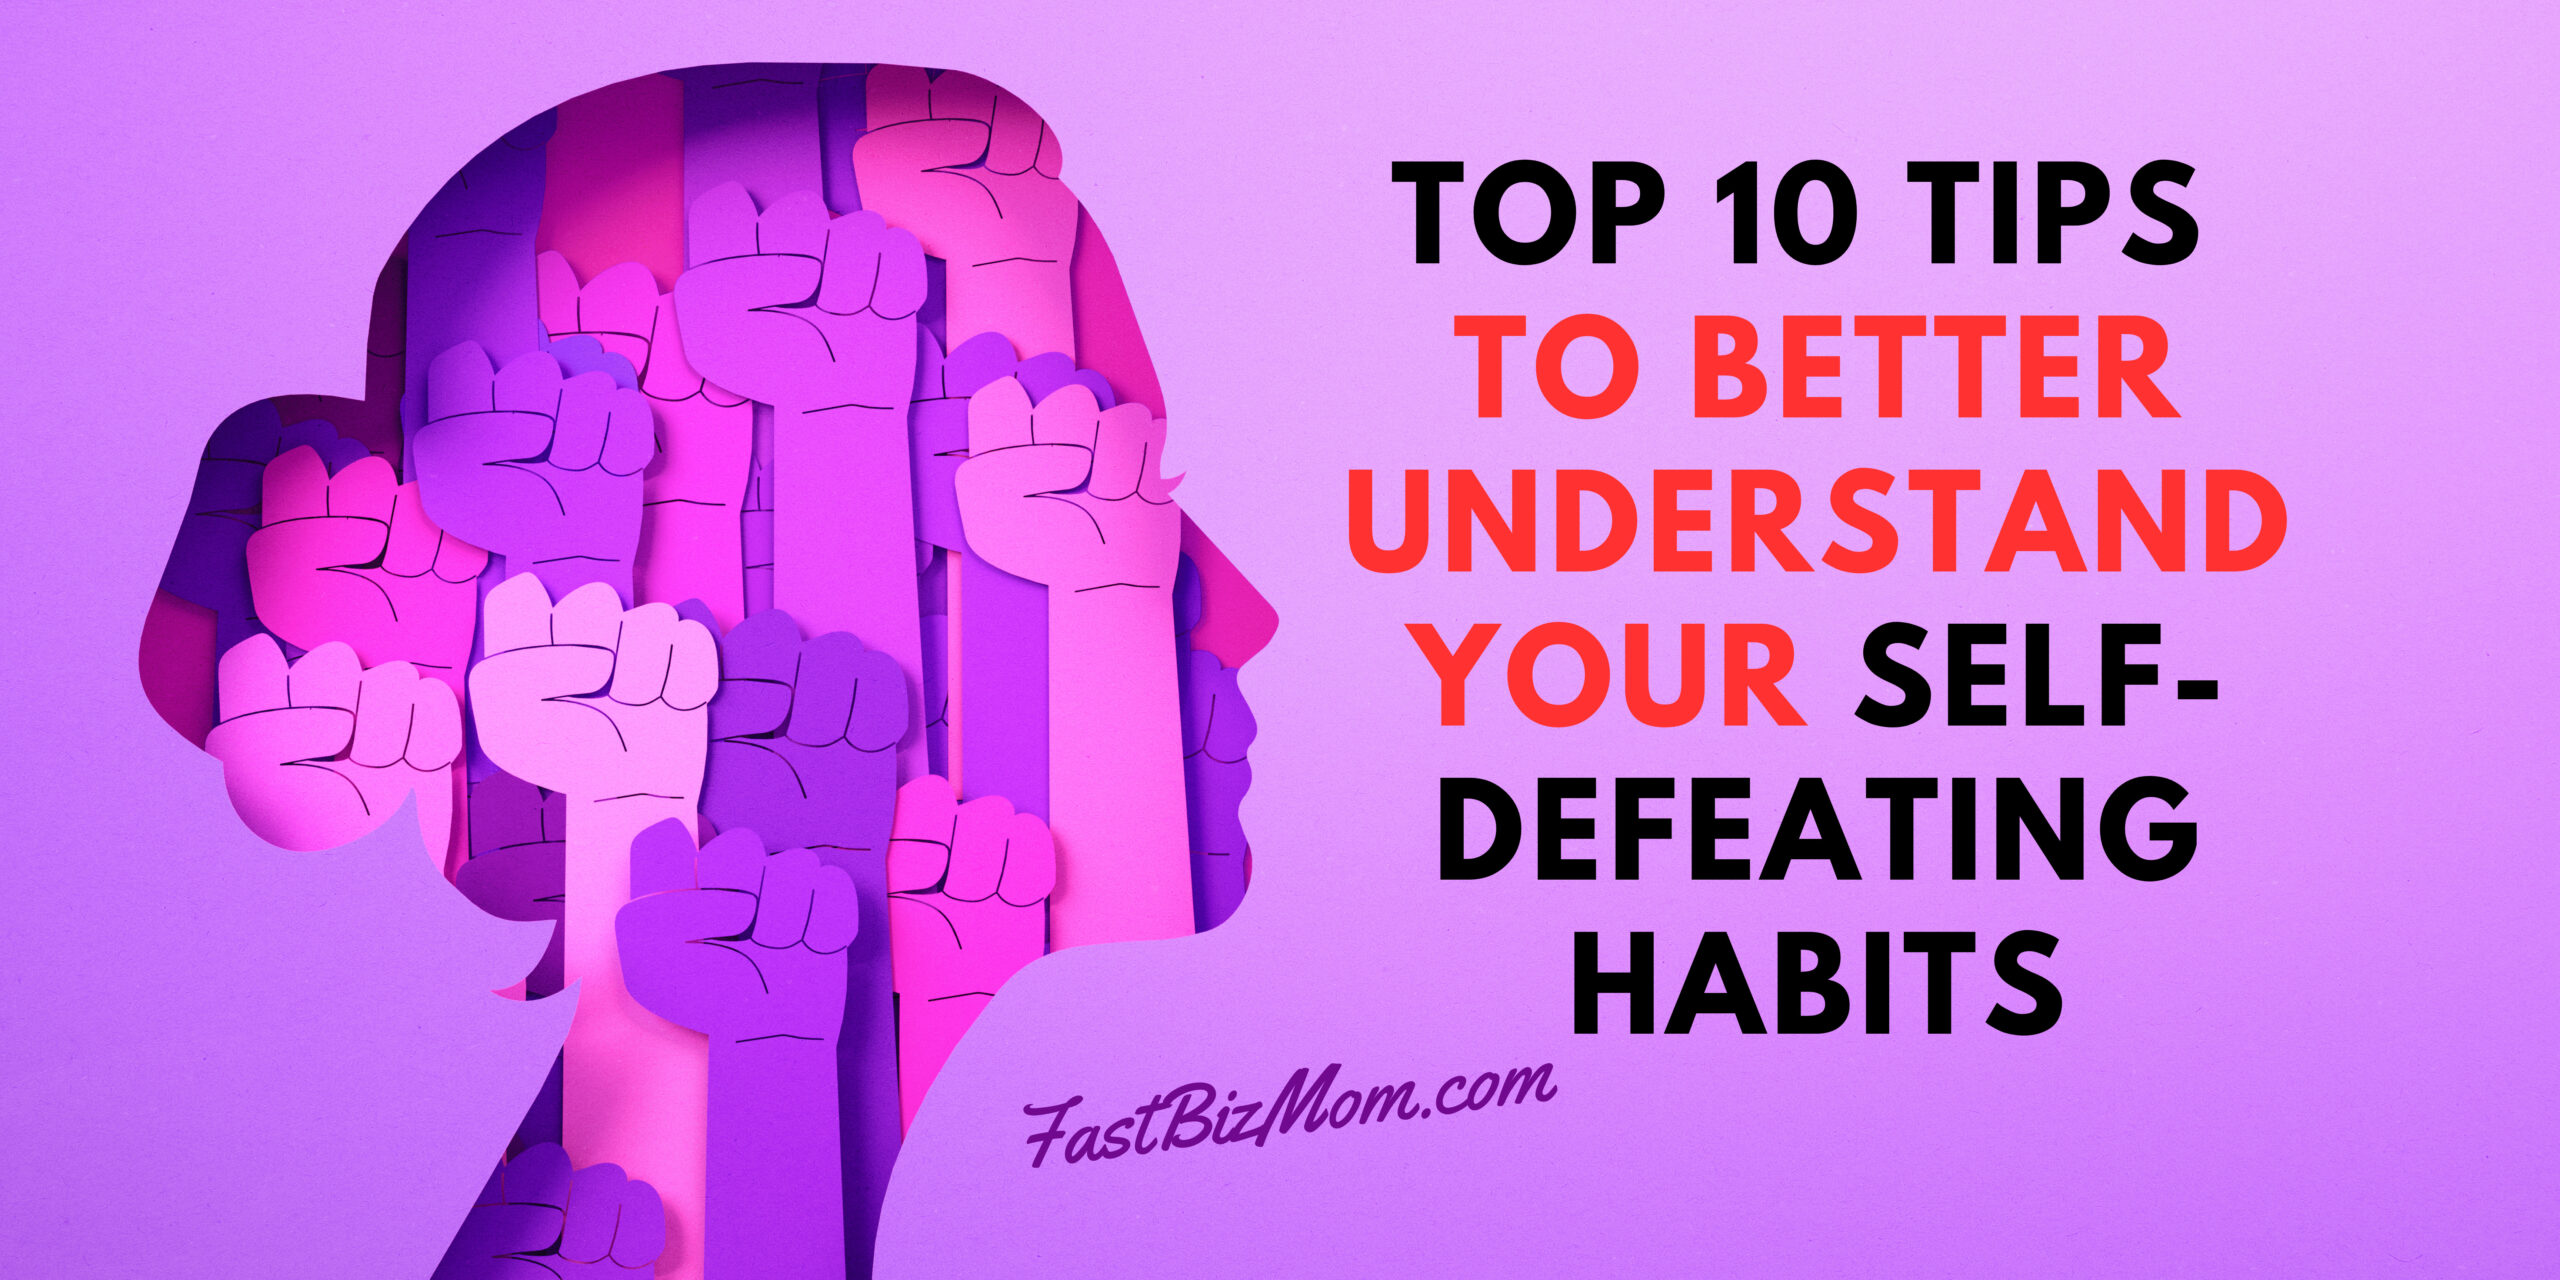 Top 10 Tips To Better Understand Your Self-Defeating Habits